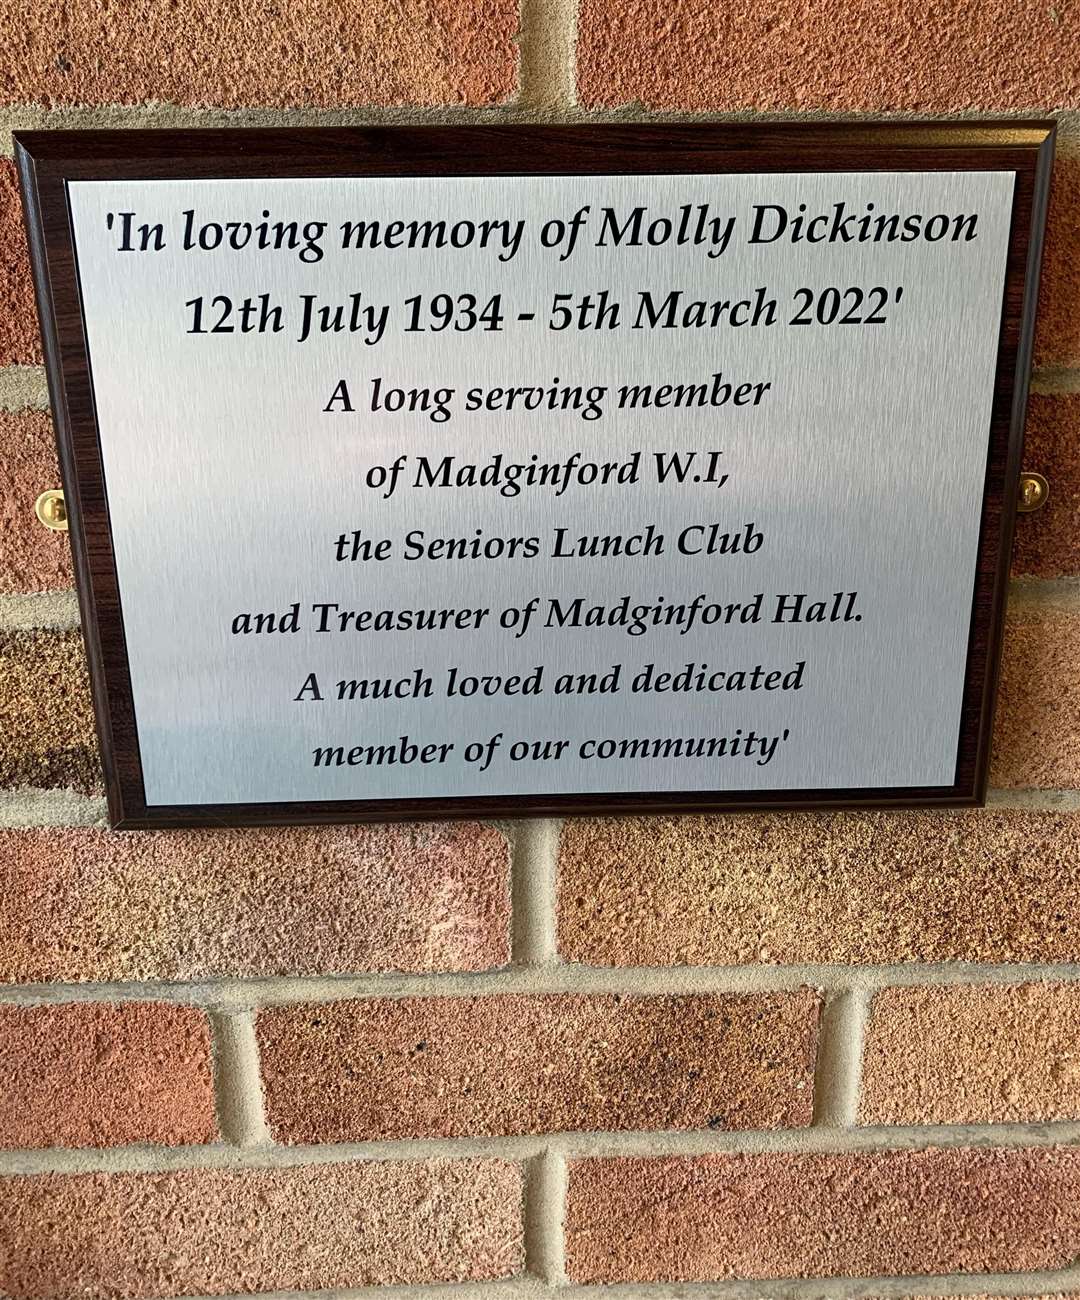 The plaque to Molly Dickinson